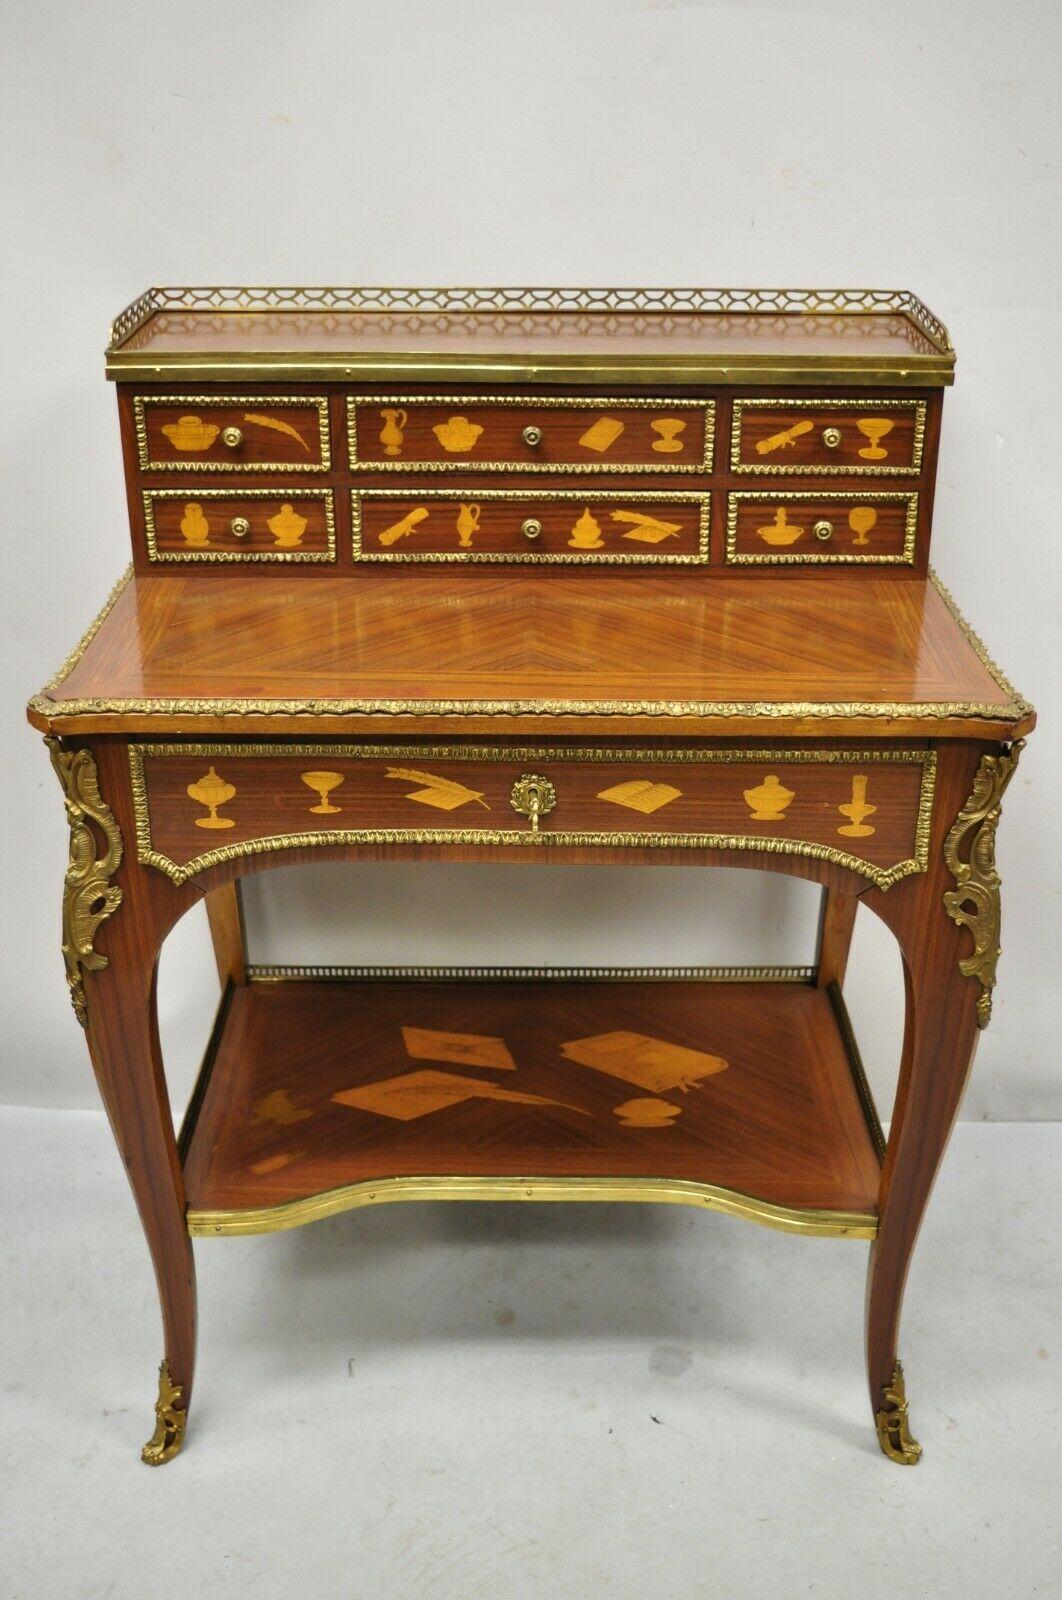 Vintage French Louis XV style marquetry inlay bronze ormolu small writing desk. Item features ornate bronze ormolu, lower shelf with inlaid desk set, satinwood floral inlay throughout, beautiful wood grain, 7 drawers, very nice vintage item, great